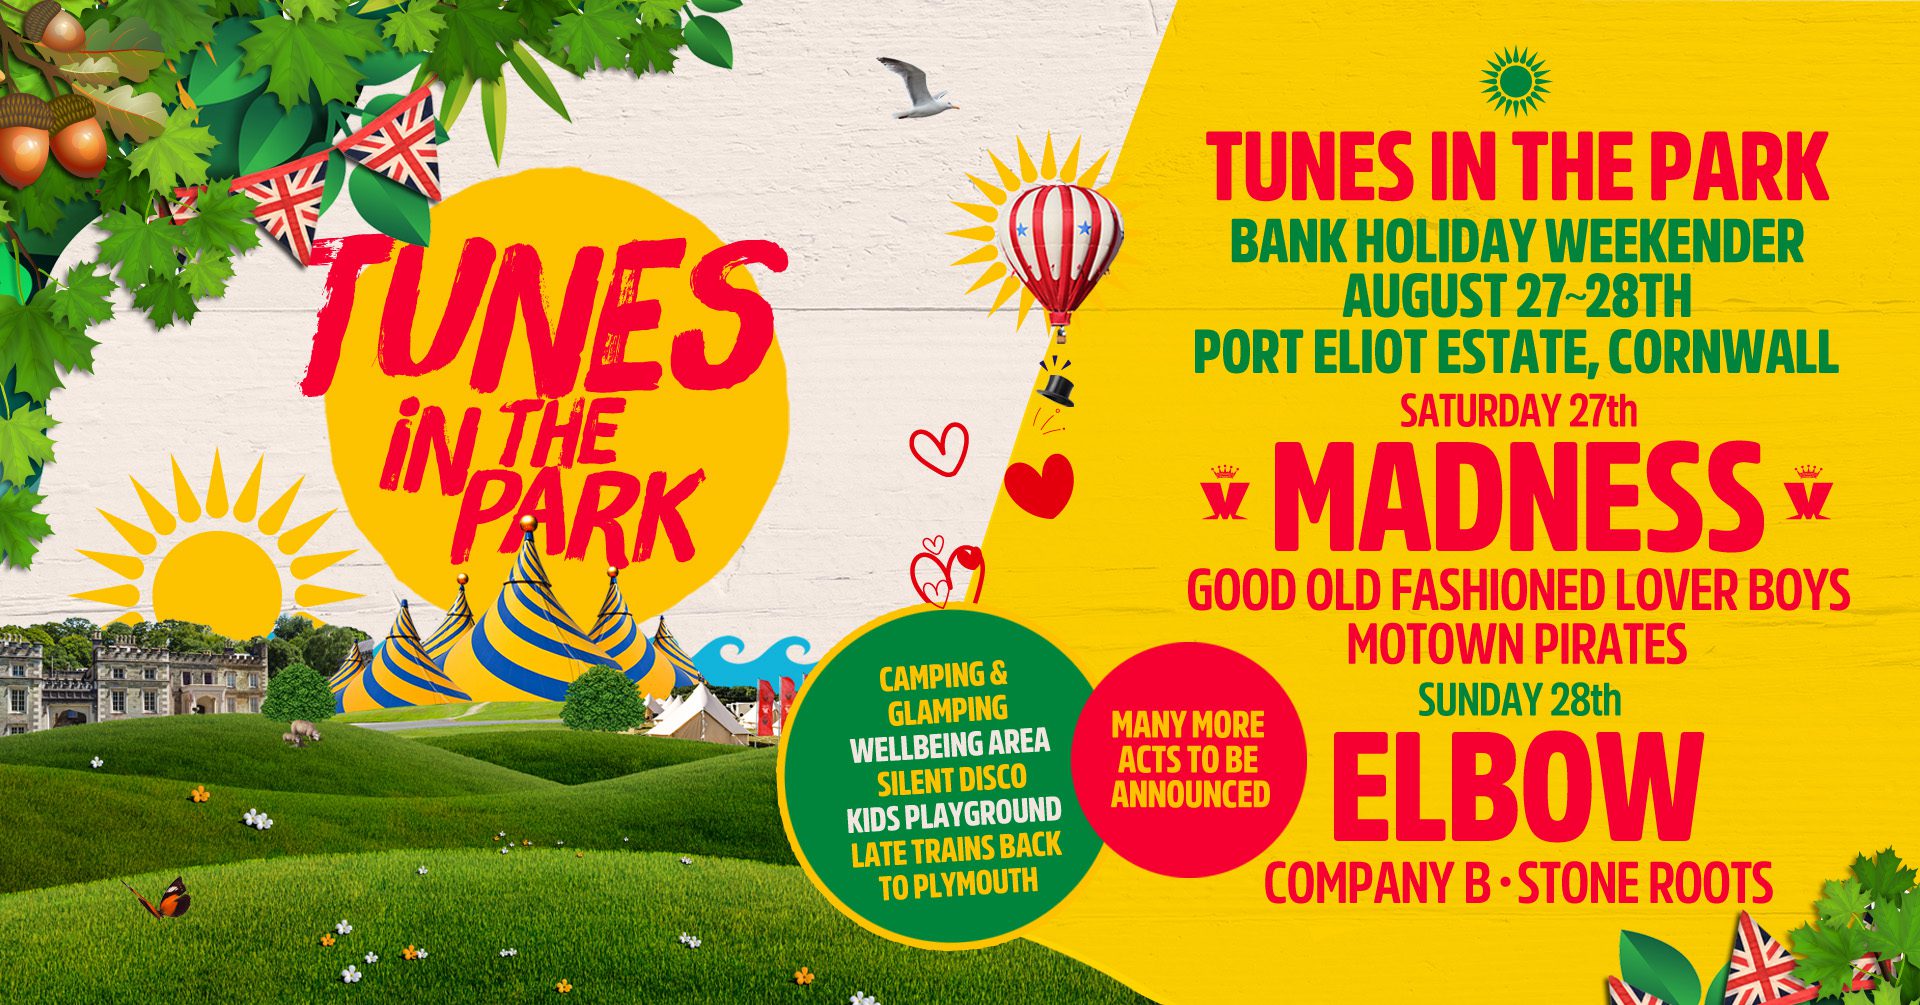 Tunes in the Park Events at Port Eliot Estate, Cornwall